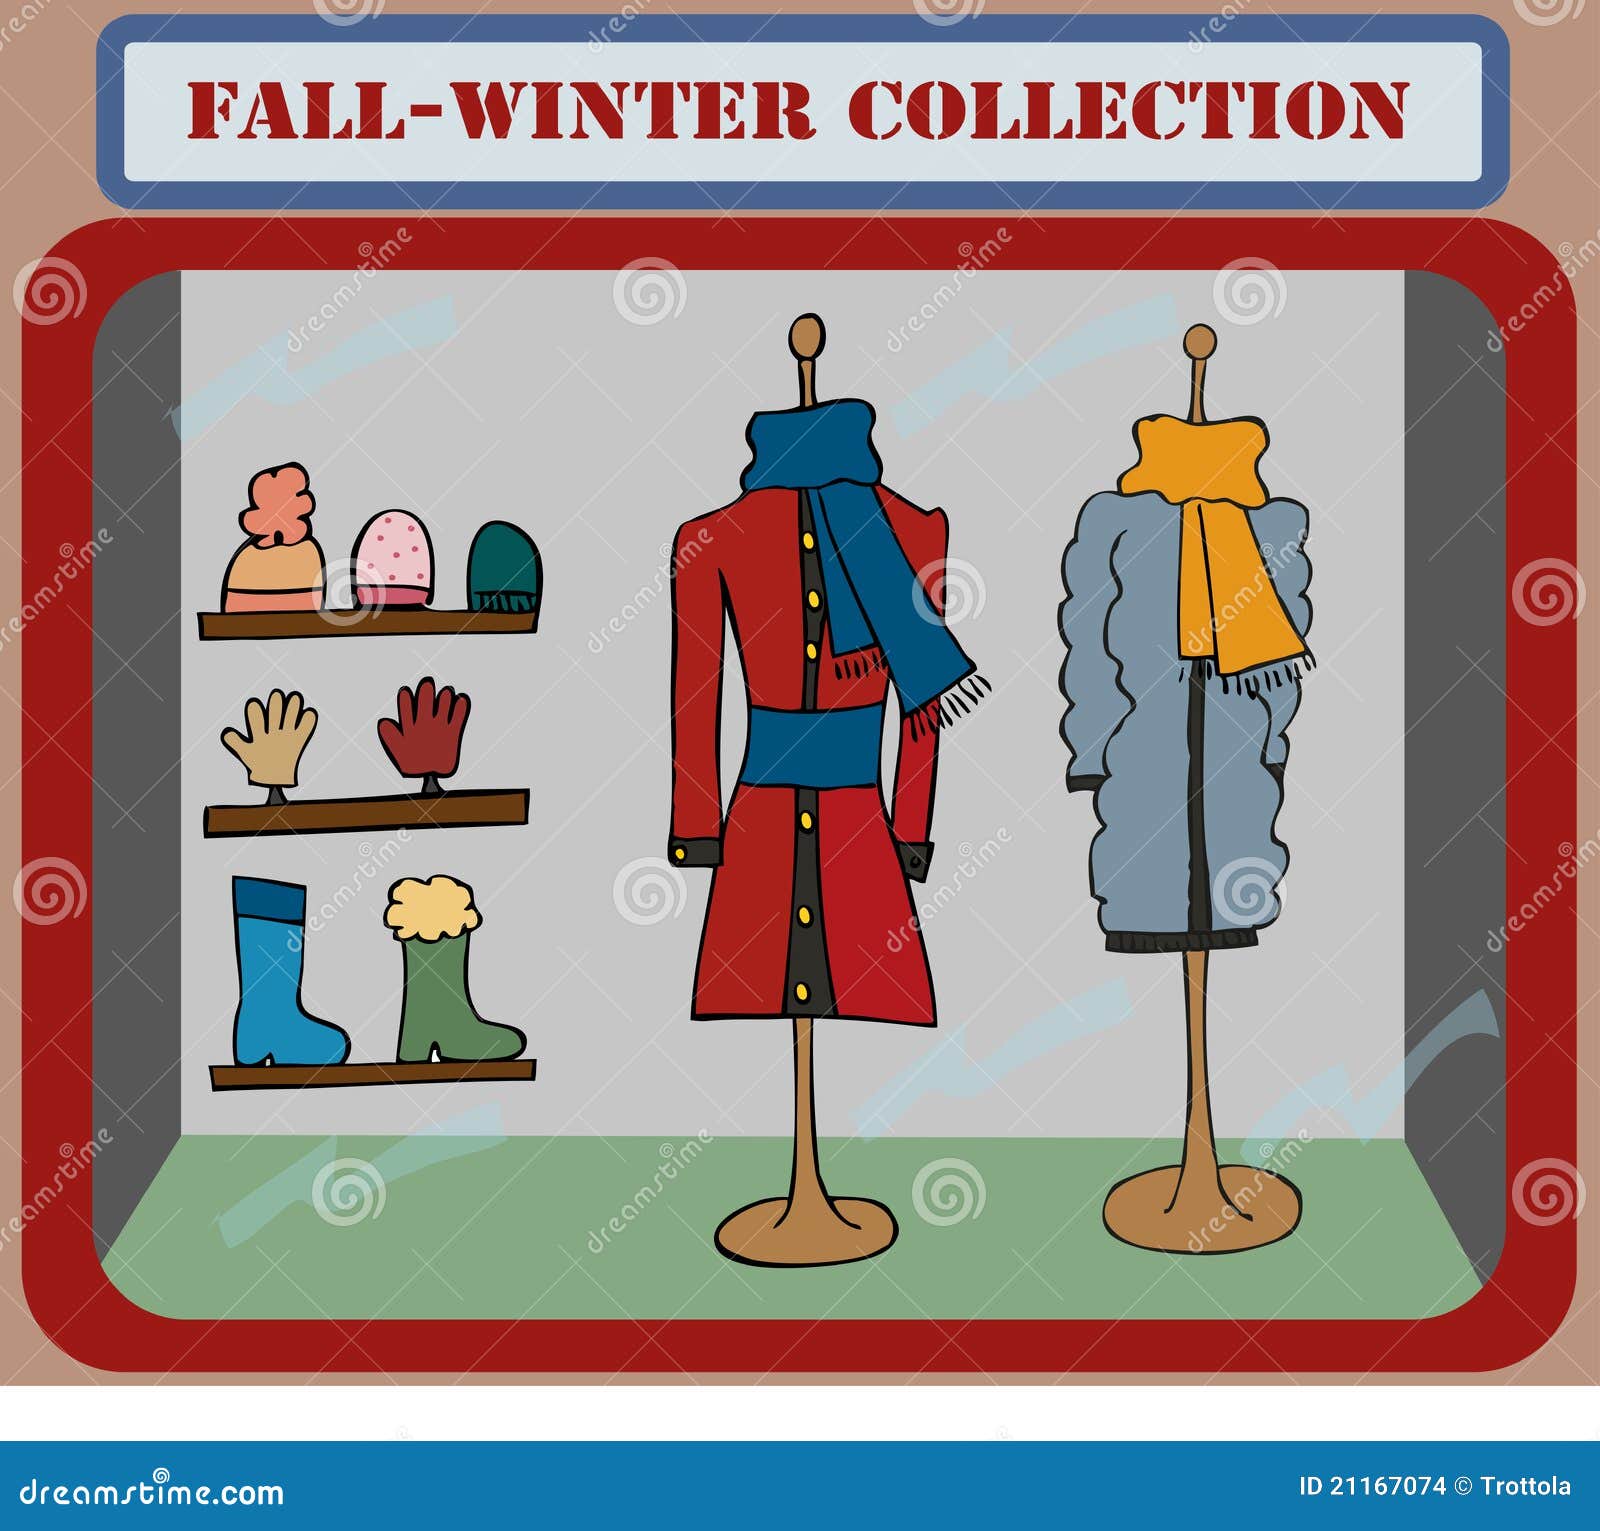 clipart clothing store - photo #19